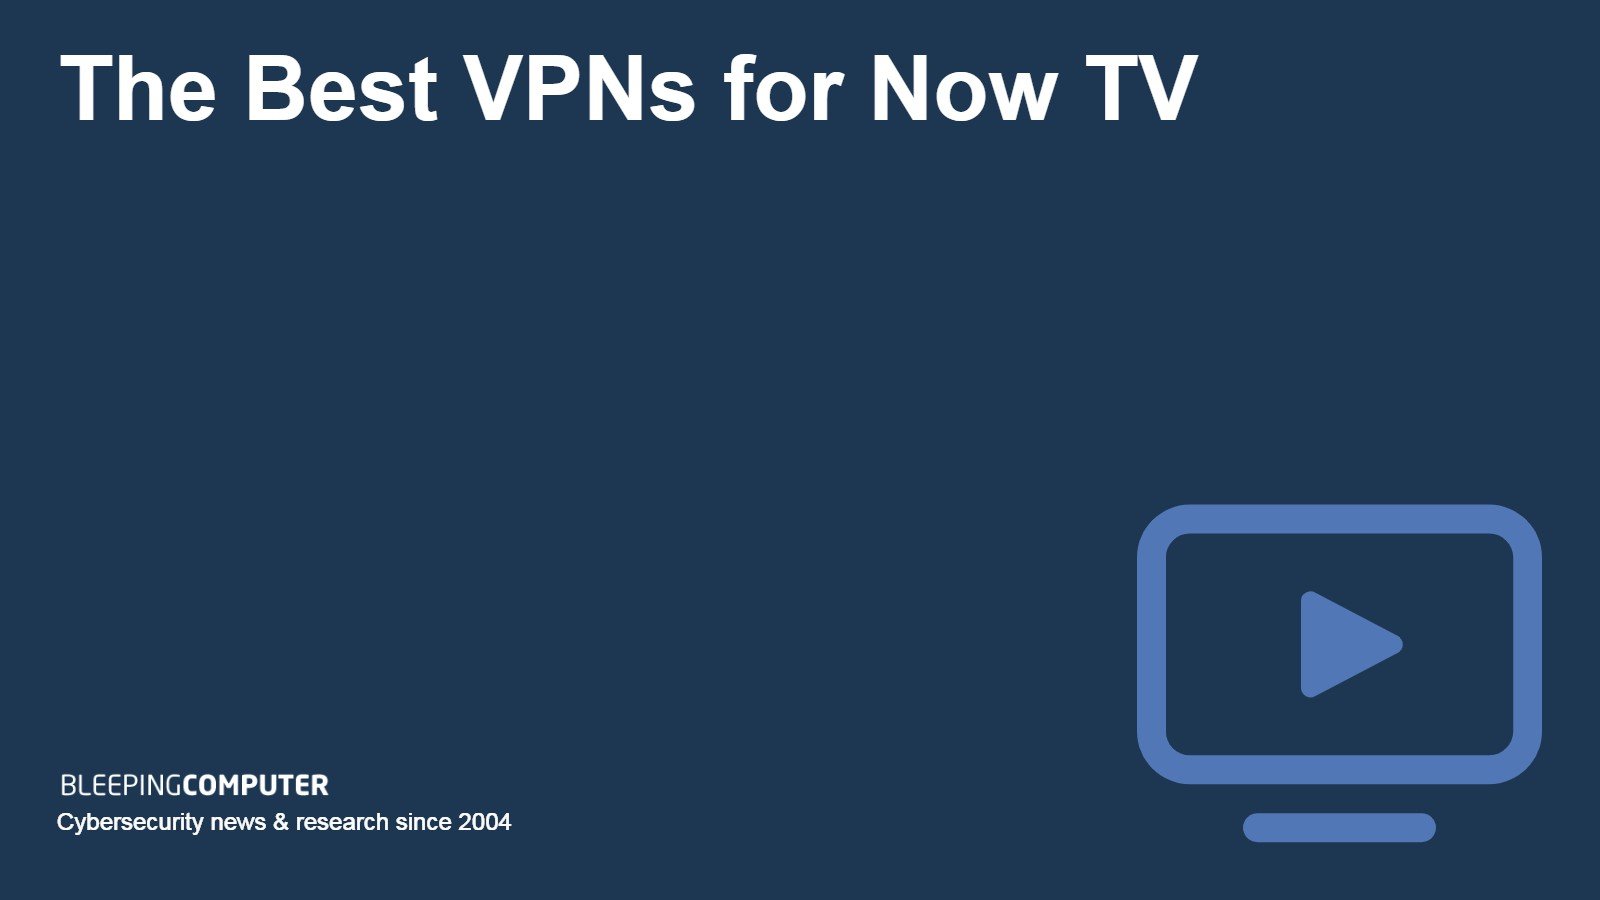 The best VPNs for Now TV in 2023